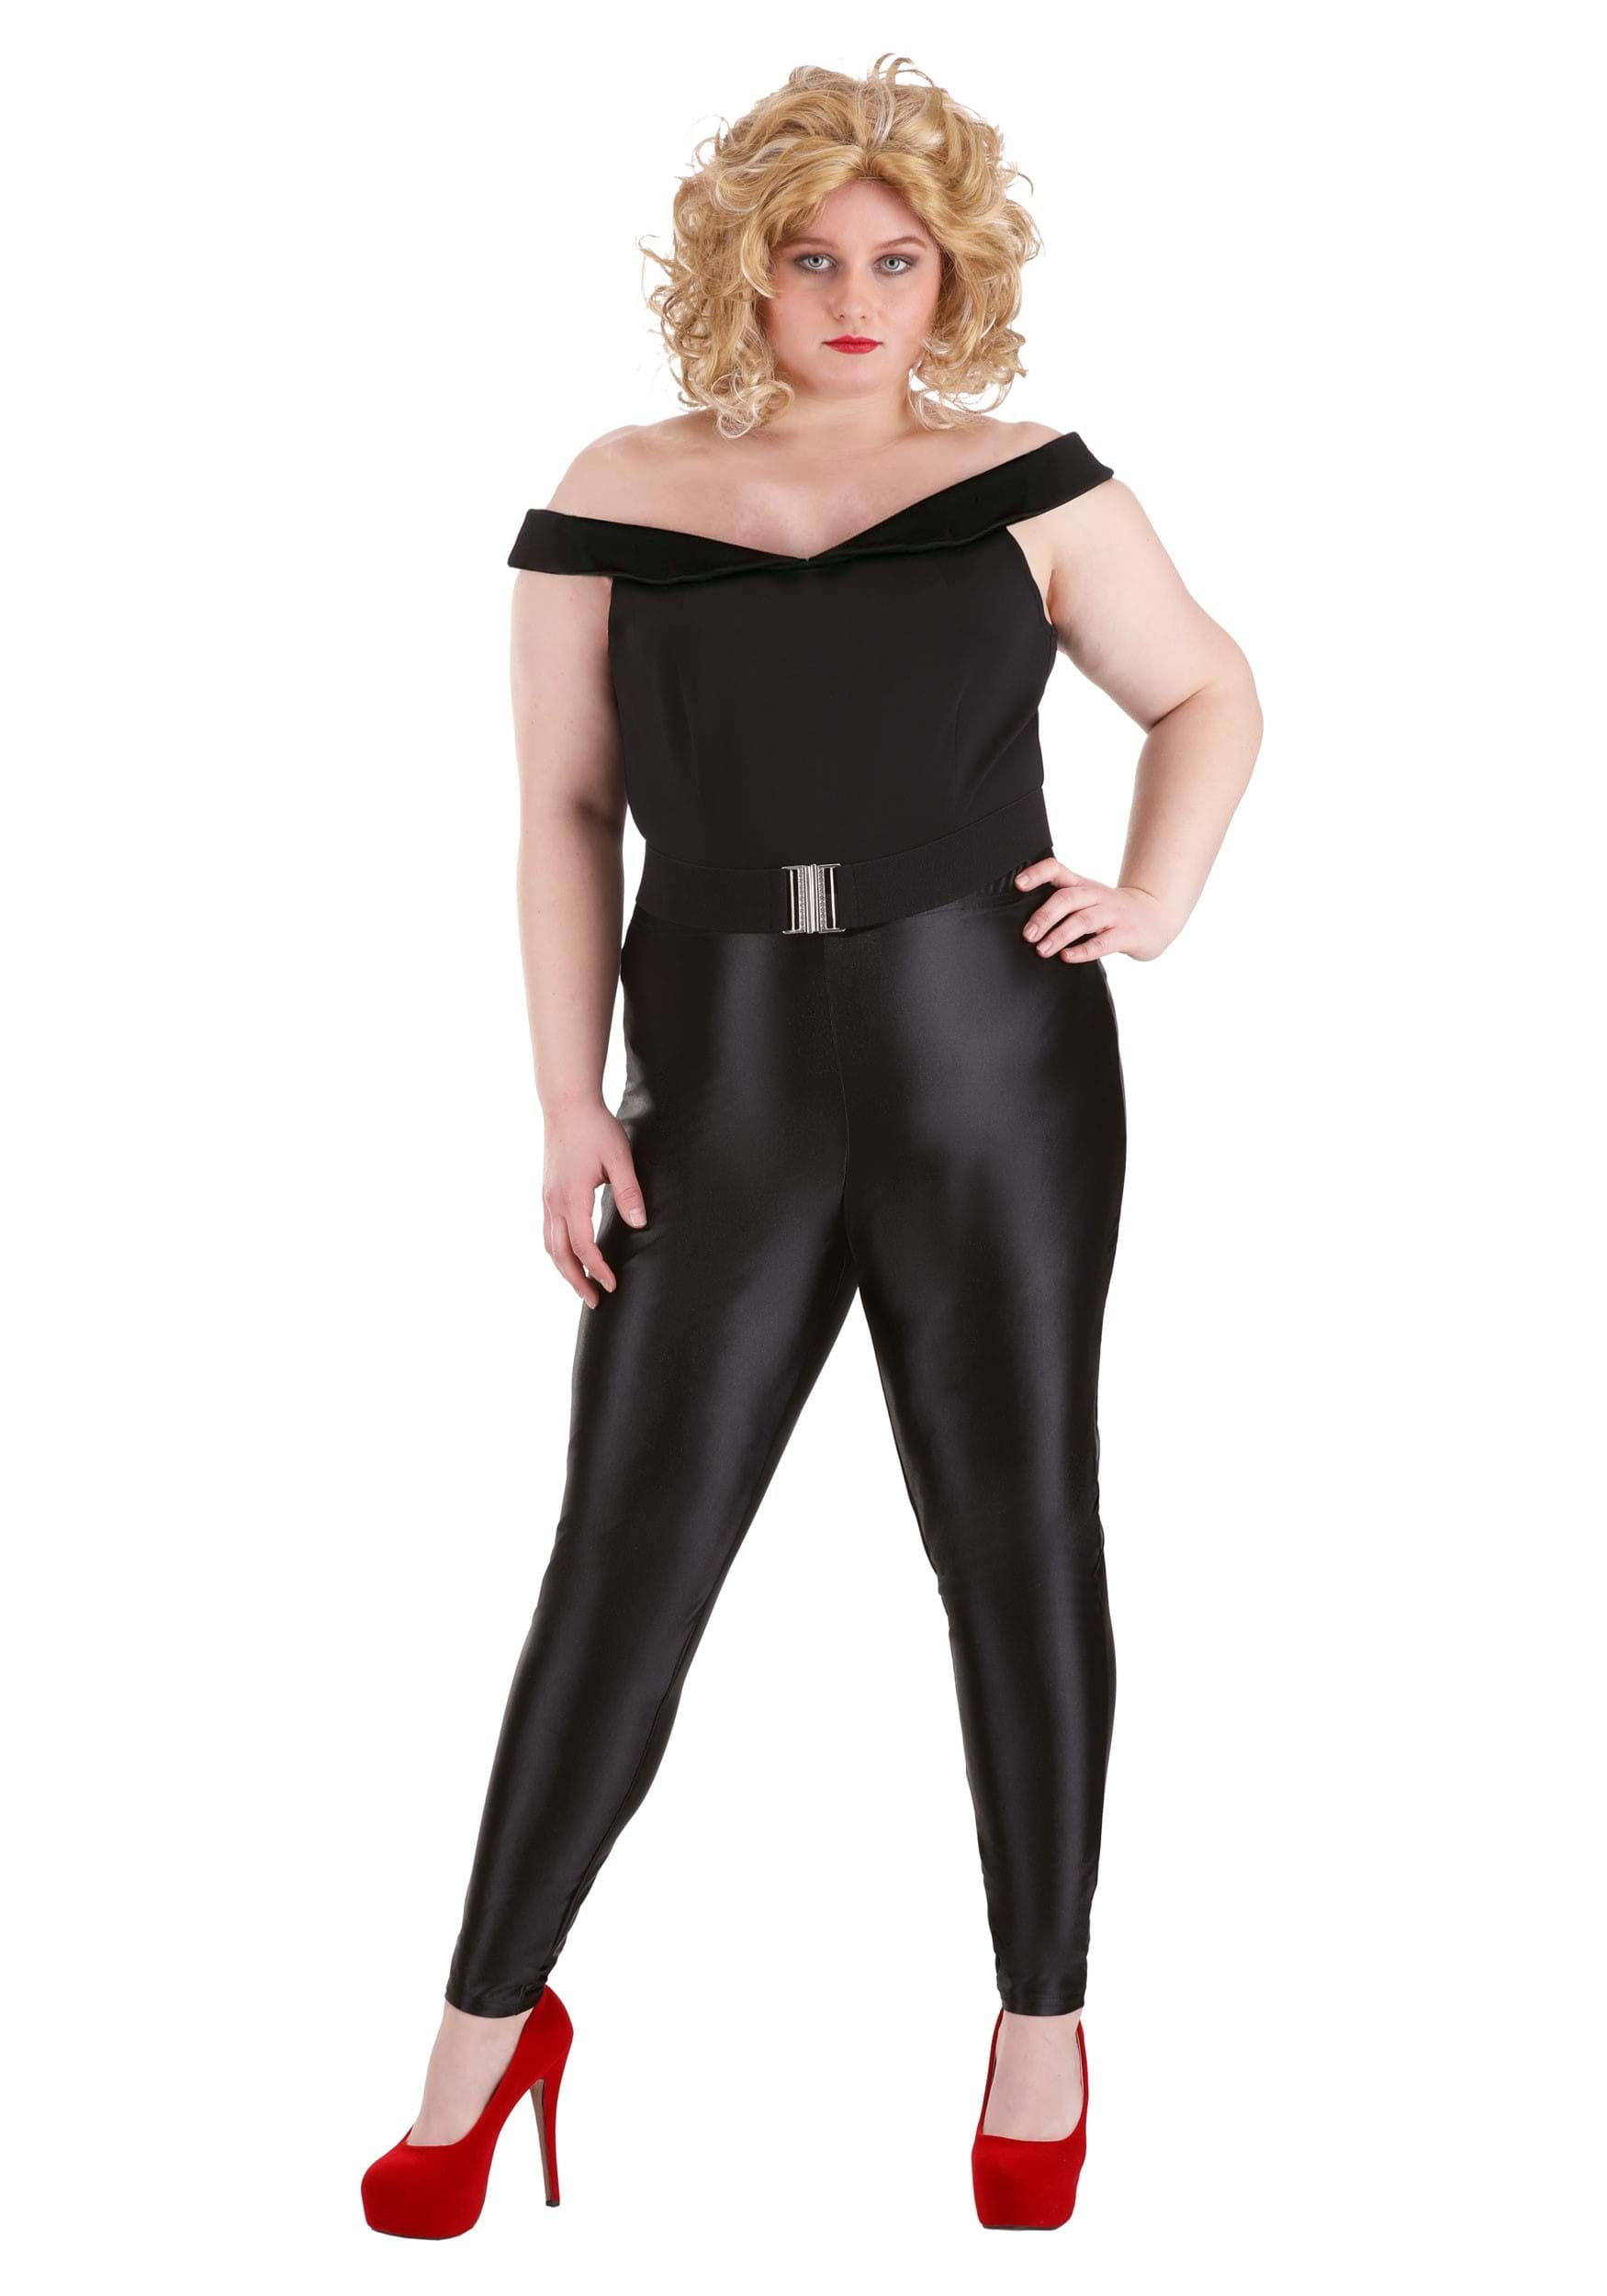 Sandy from Grease costume  Cute halloween costumes, Halloween outfits,  Holloween costume